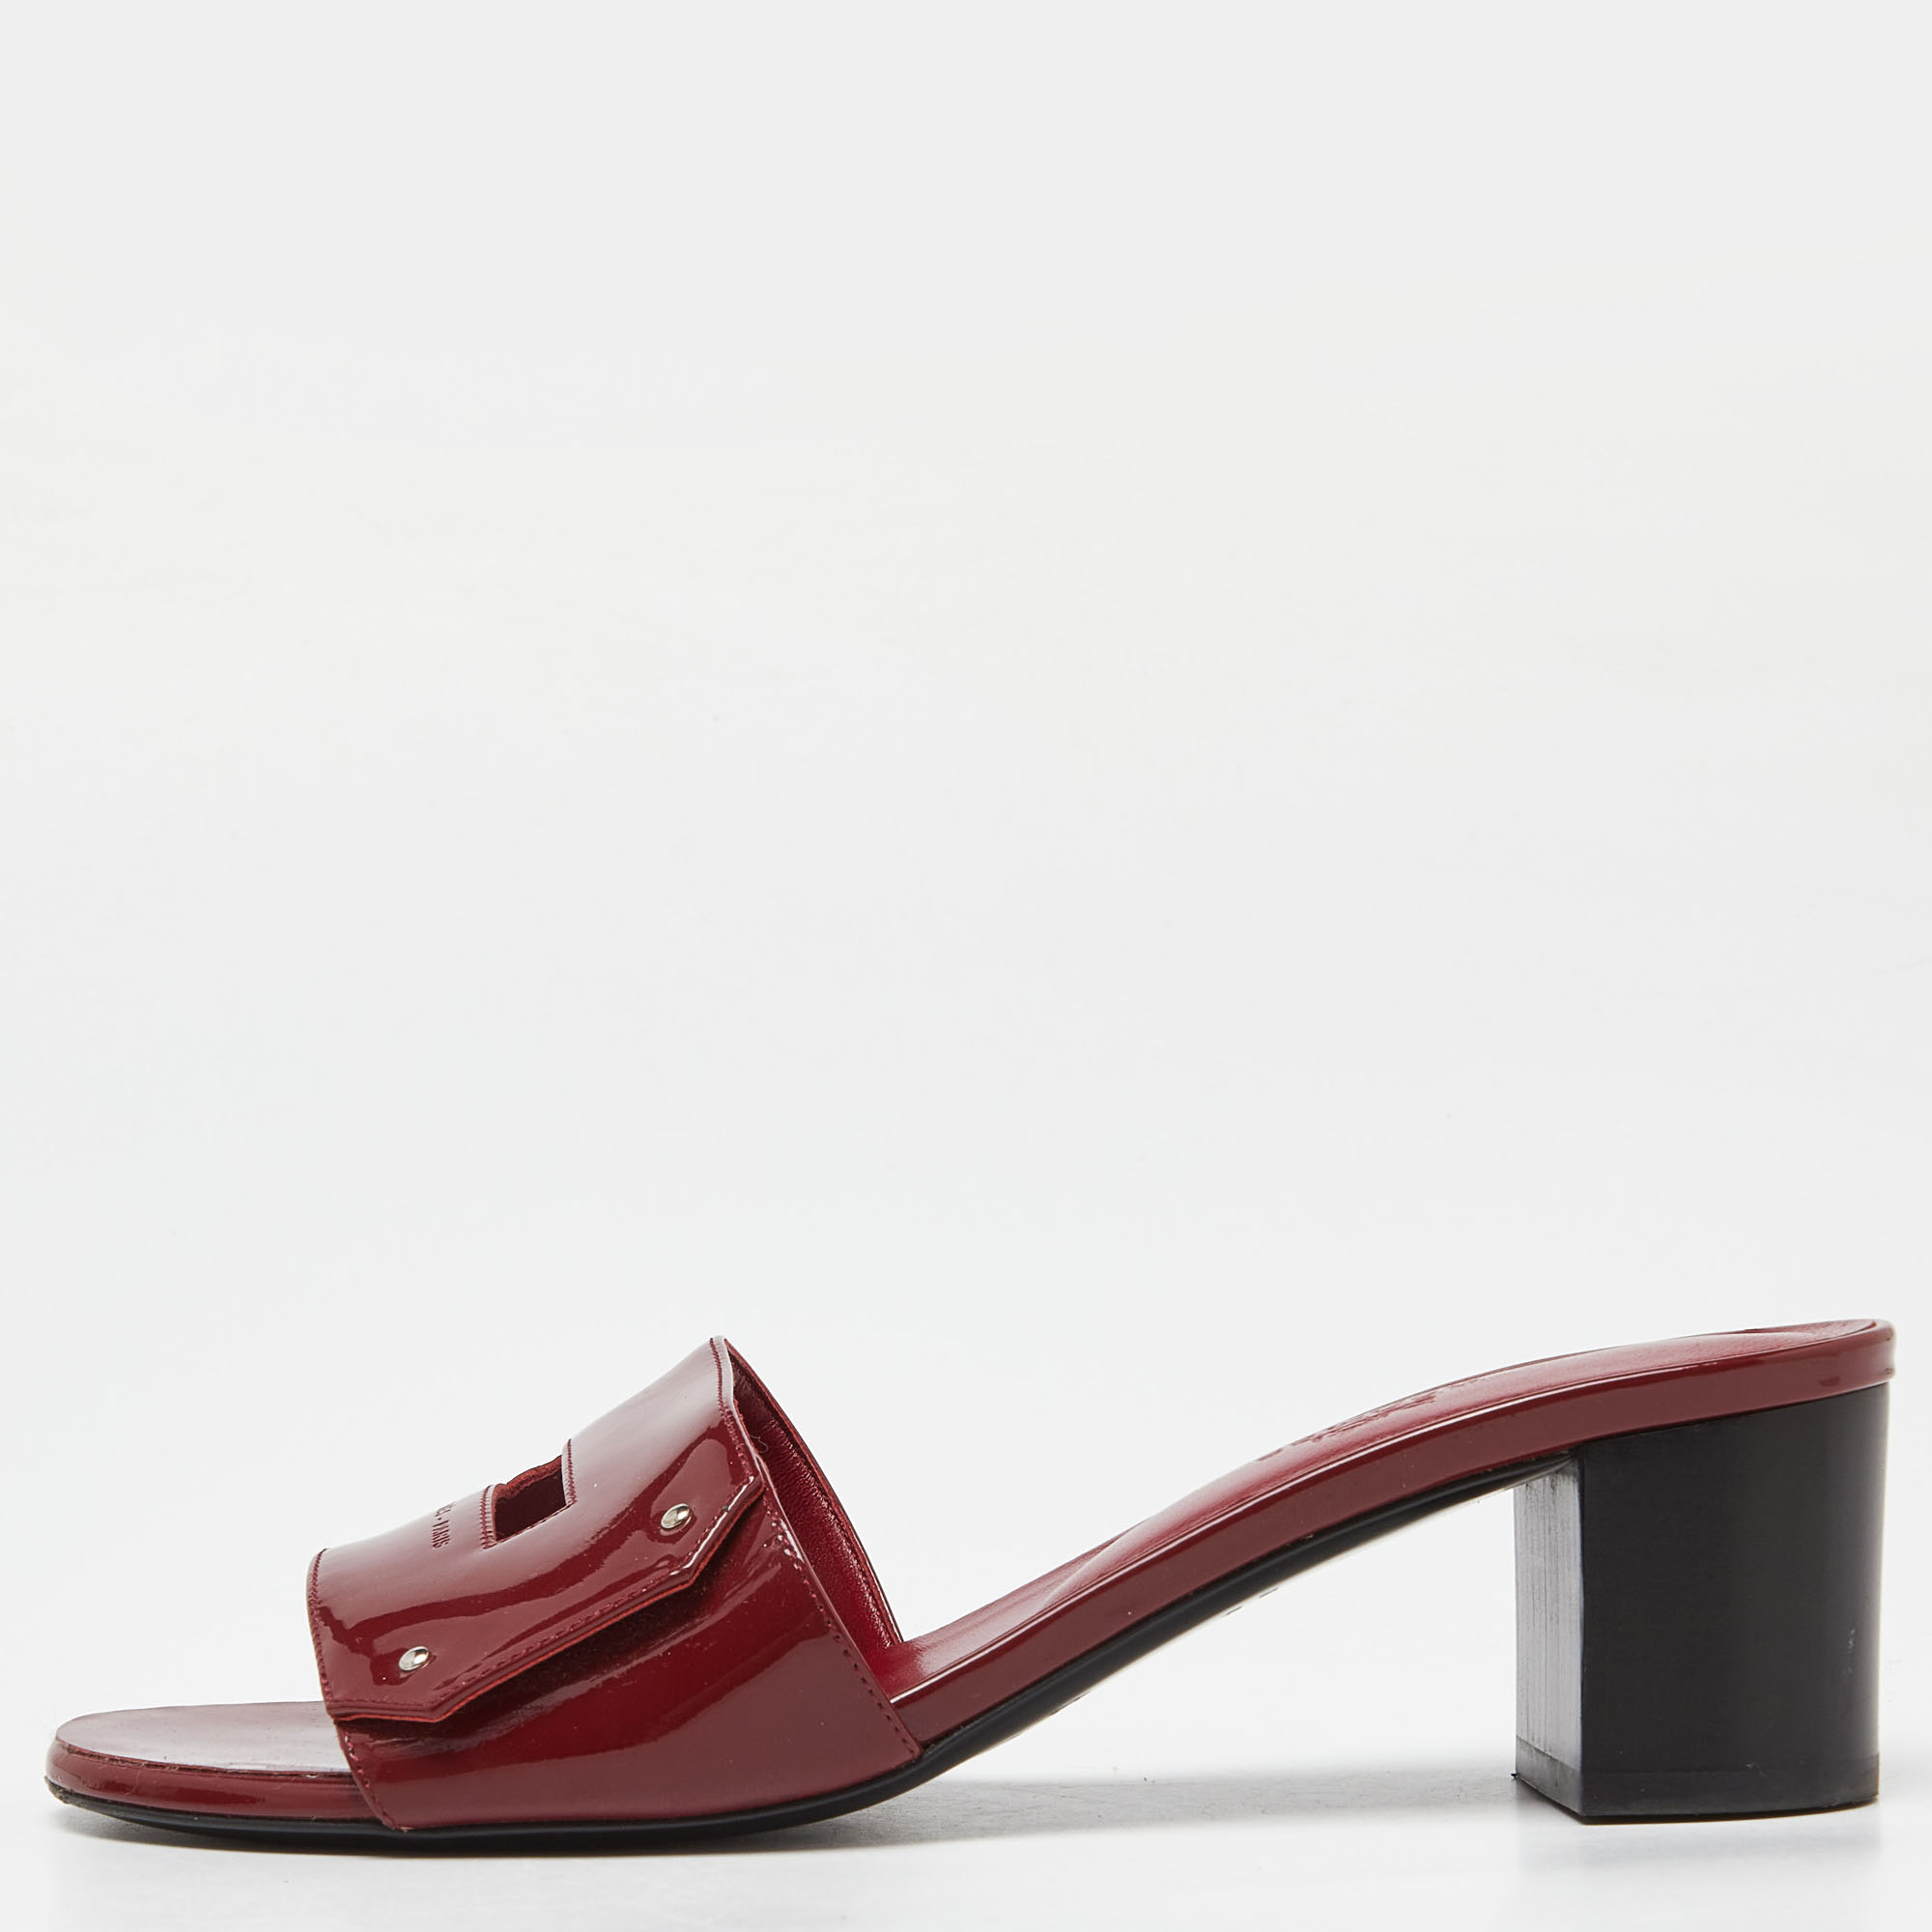 Hermes burgundy patent leather very slide sandals size 37